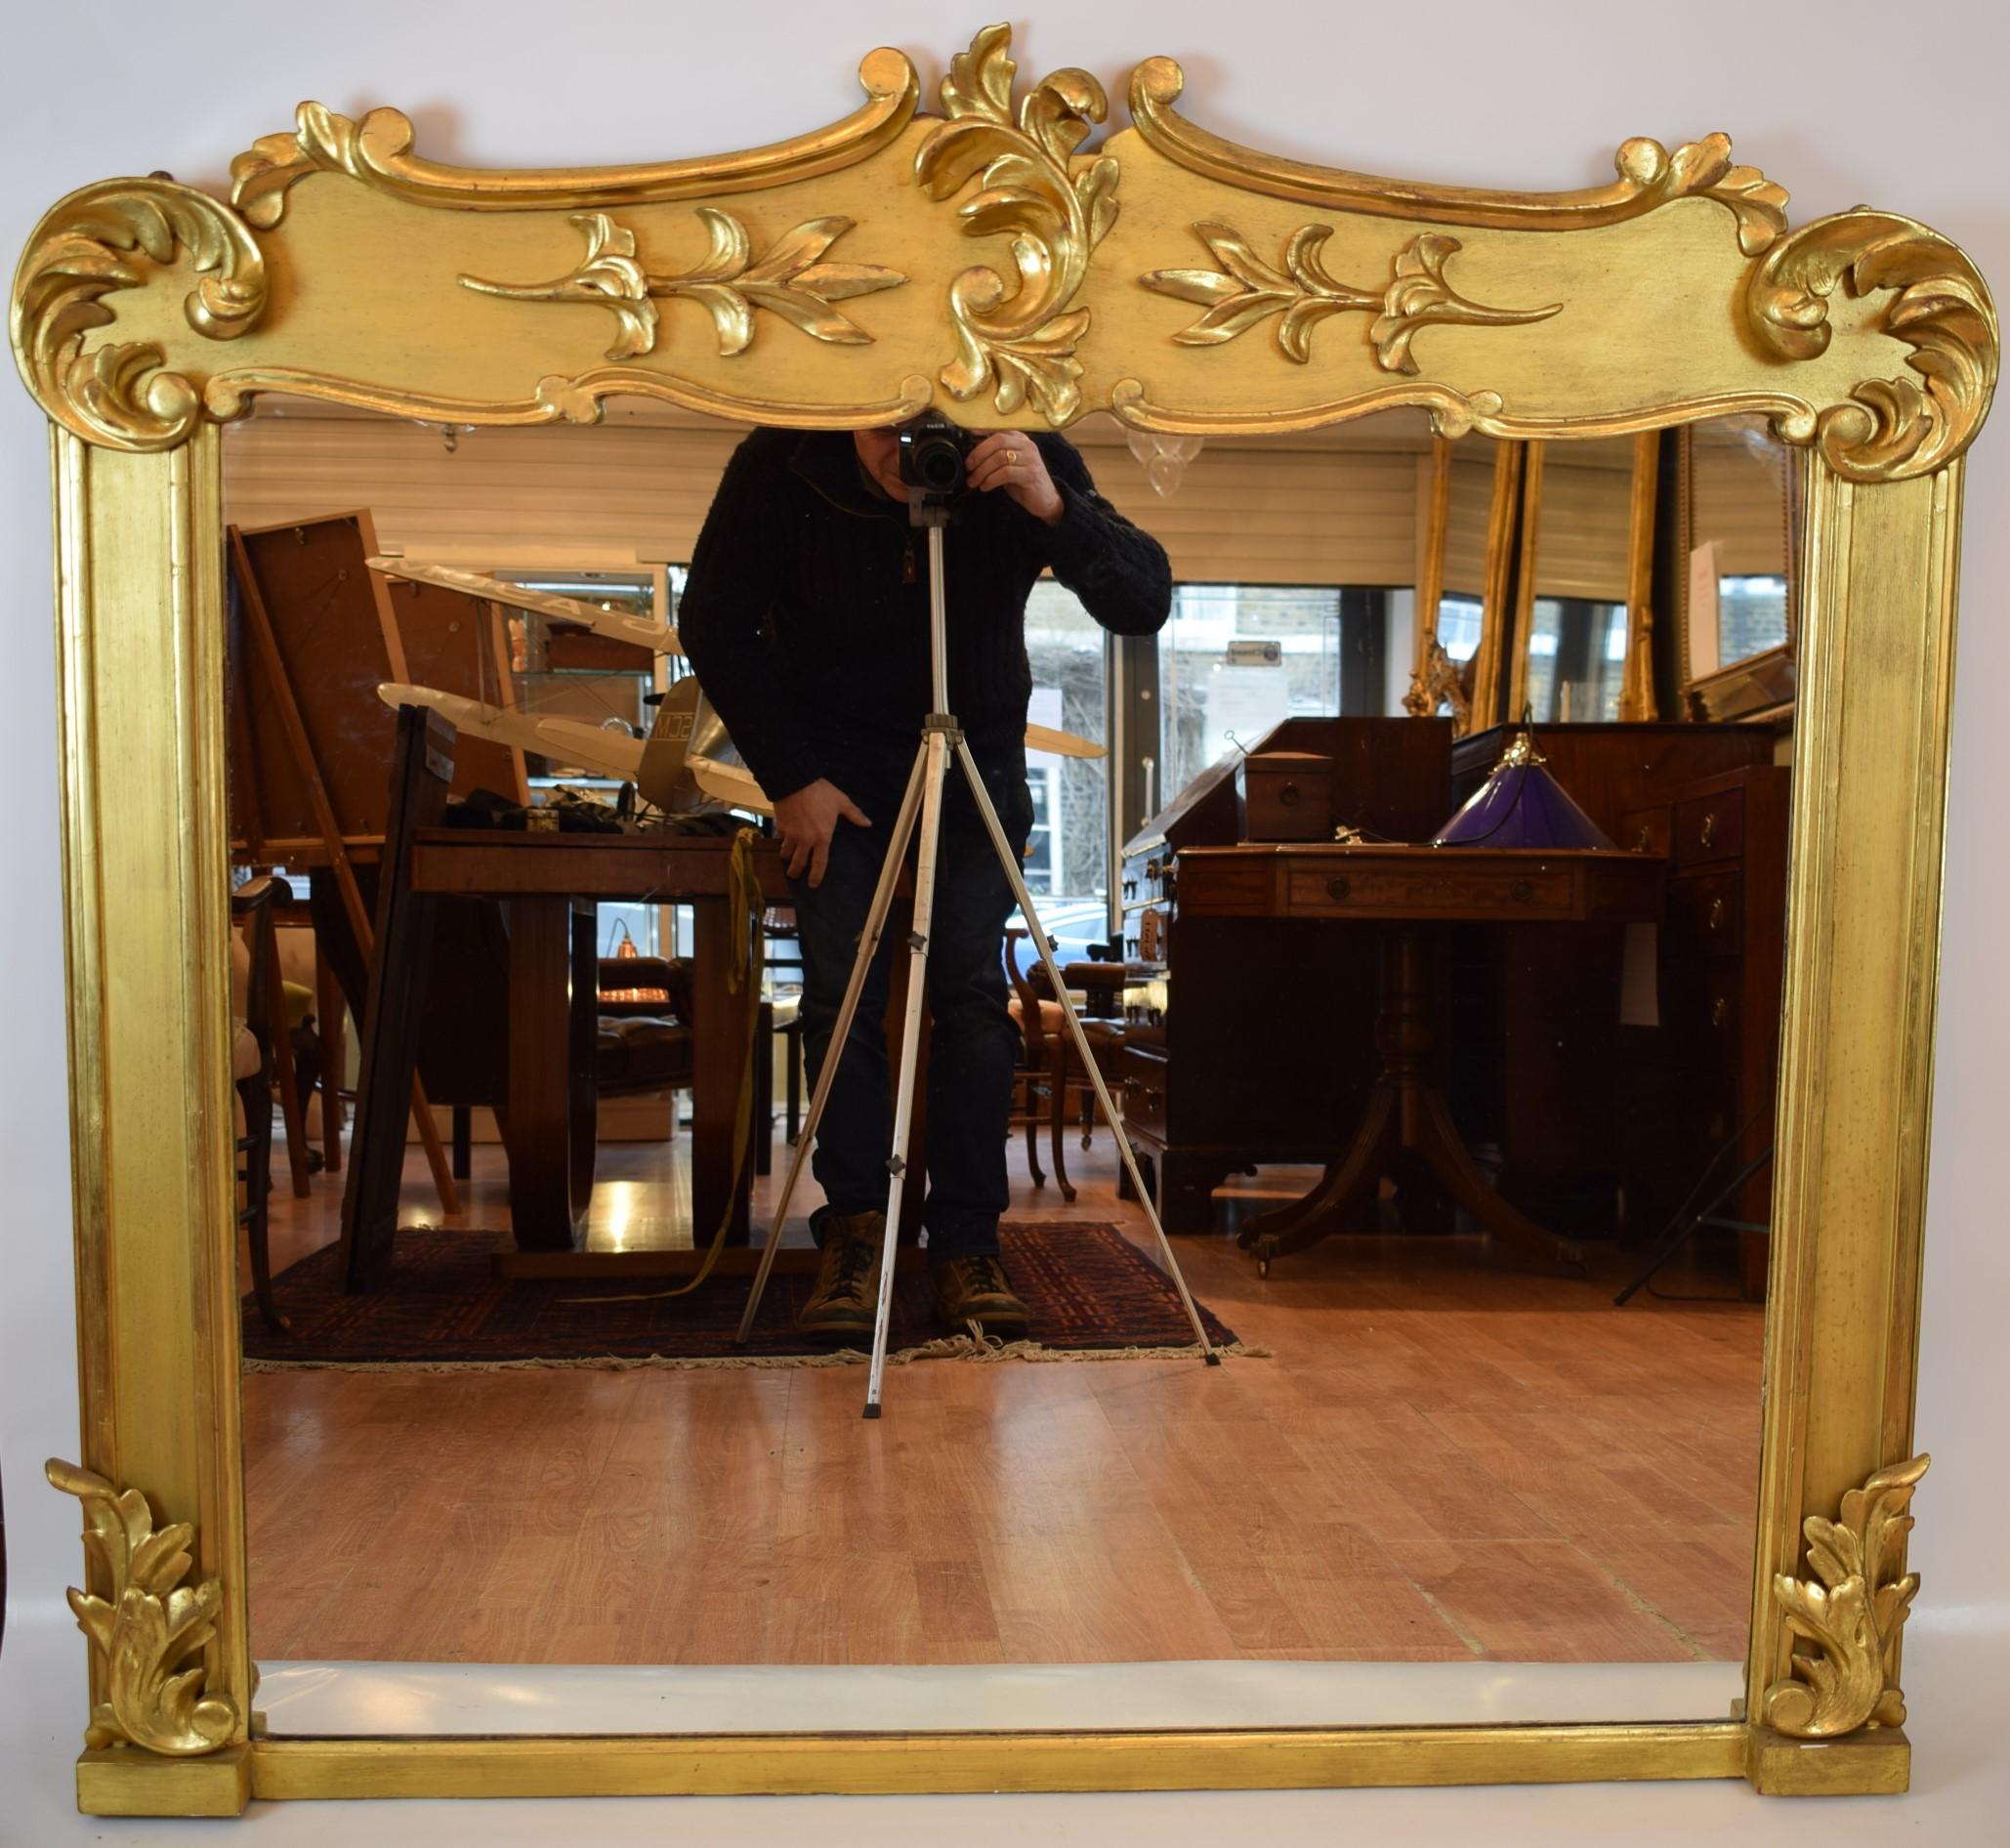 A rare Irish antique gilded overmantel mirror with very good original mercury glass and excellent gilding with a depth of warm gold.
The proportions of this mirror are excellent and hard to find. This shape is often very desirable for lower ceiling